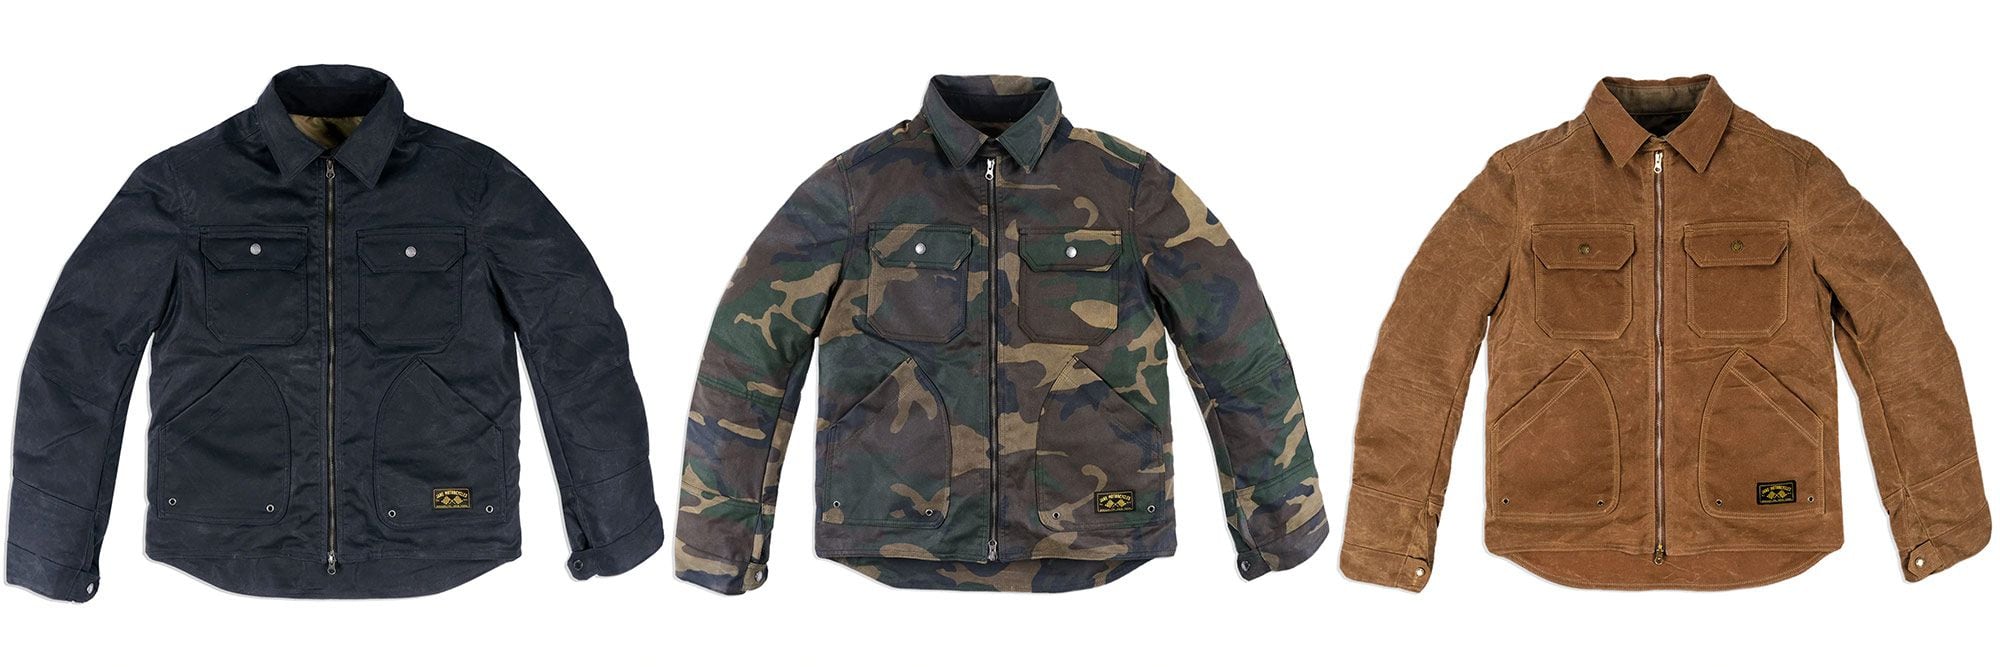 In addition to the Woodland Camo seen here, the Driggs 2.0 jacket is available in black and tan.